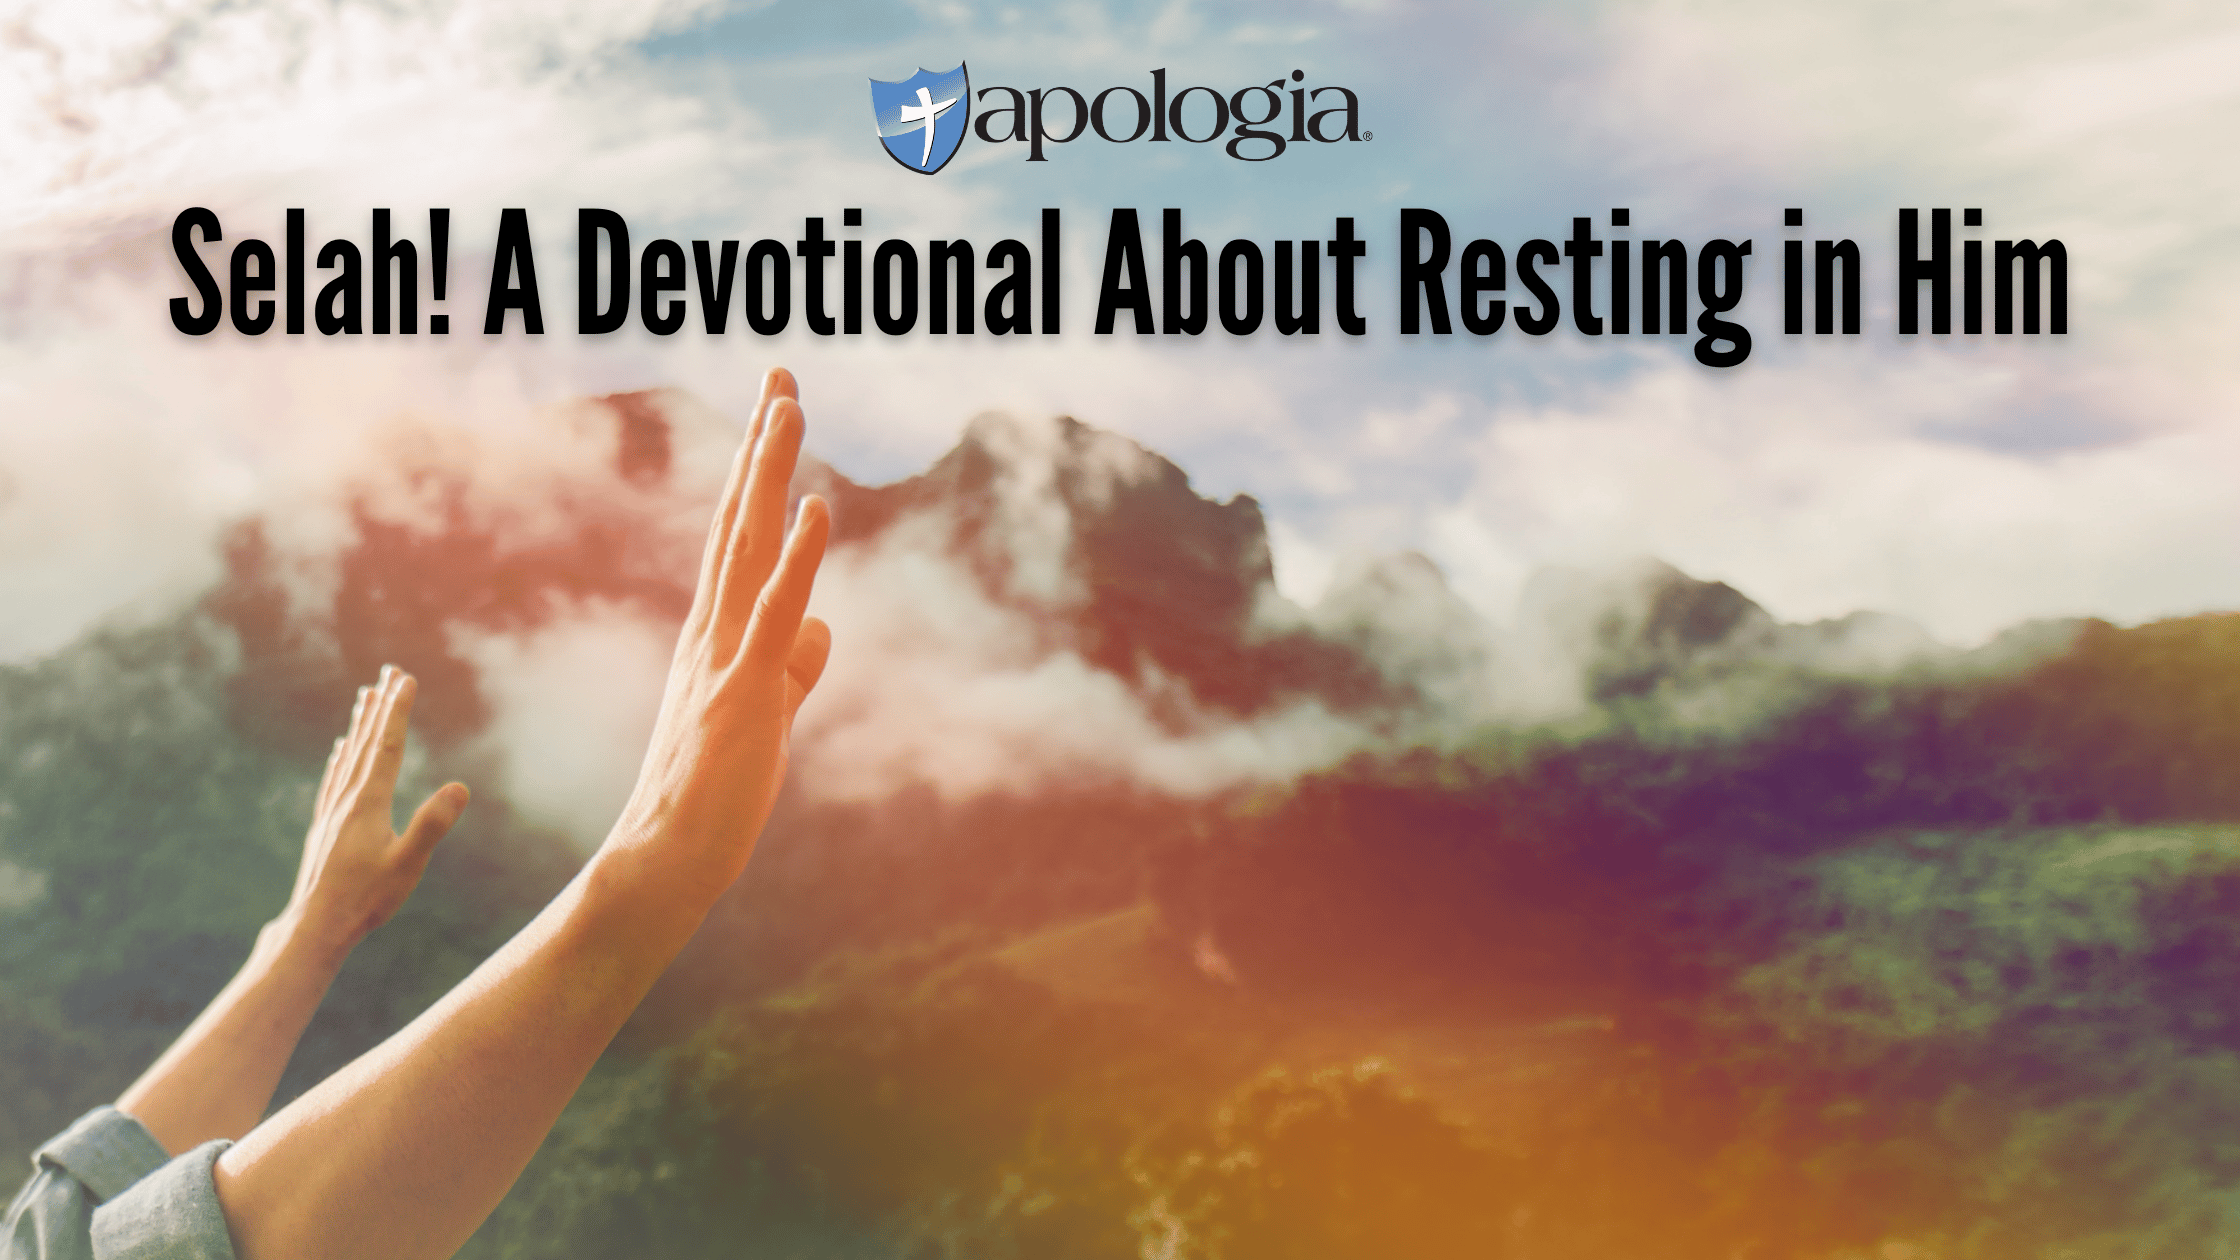 Selah! A Devotional About Resting in Him